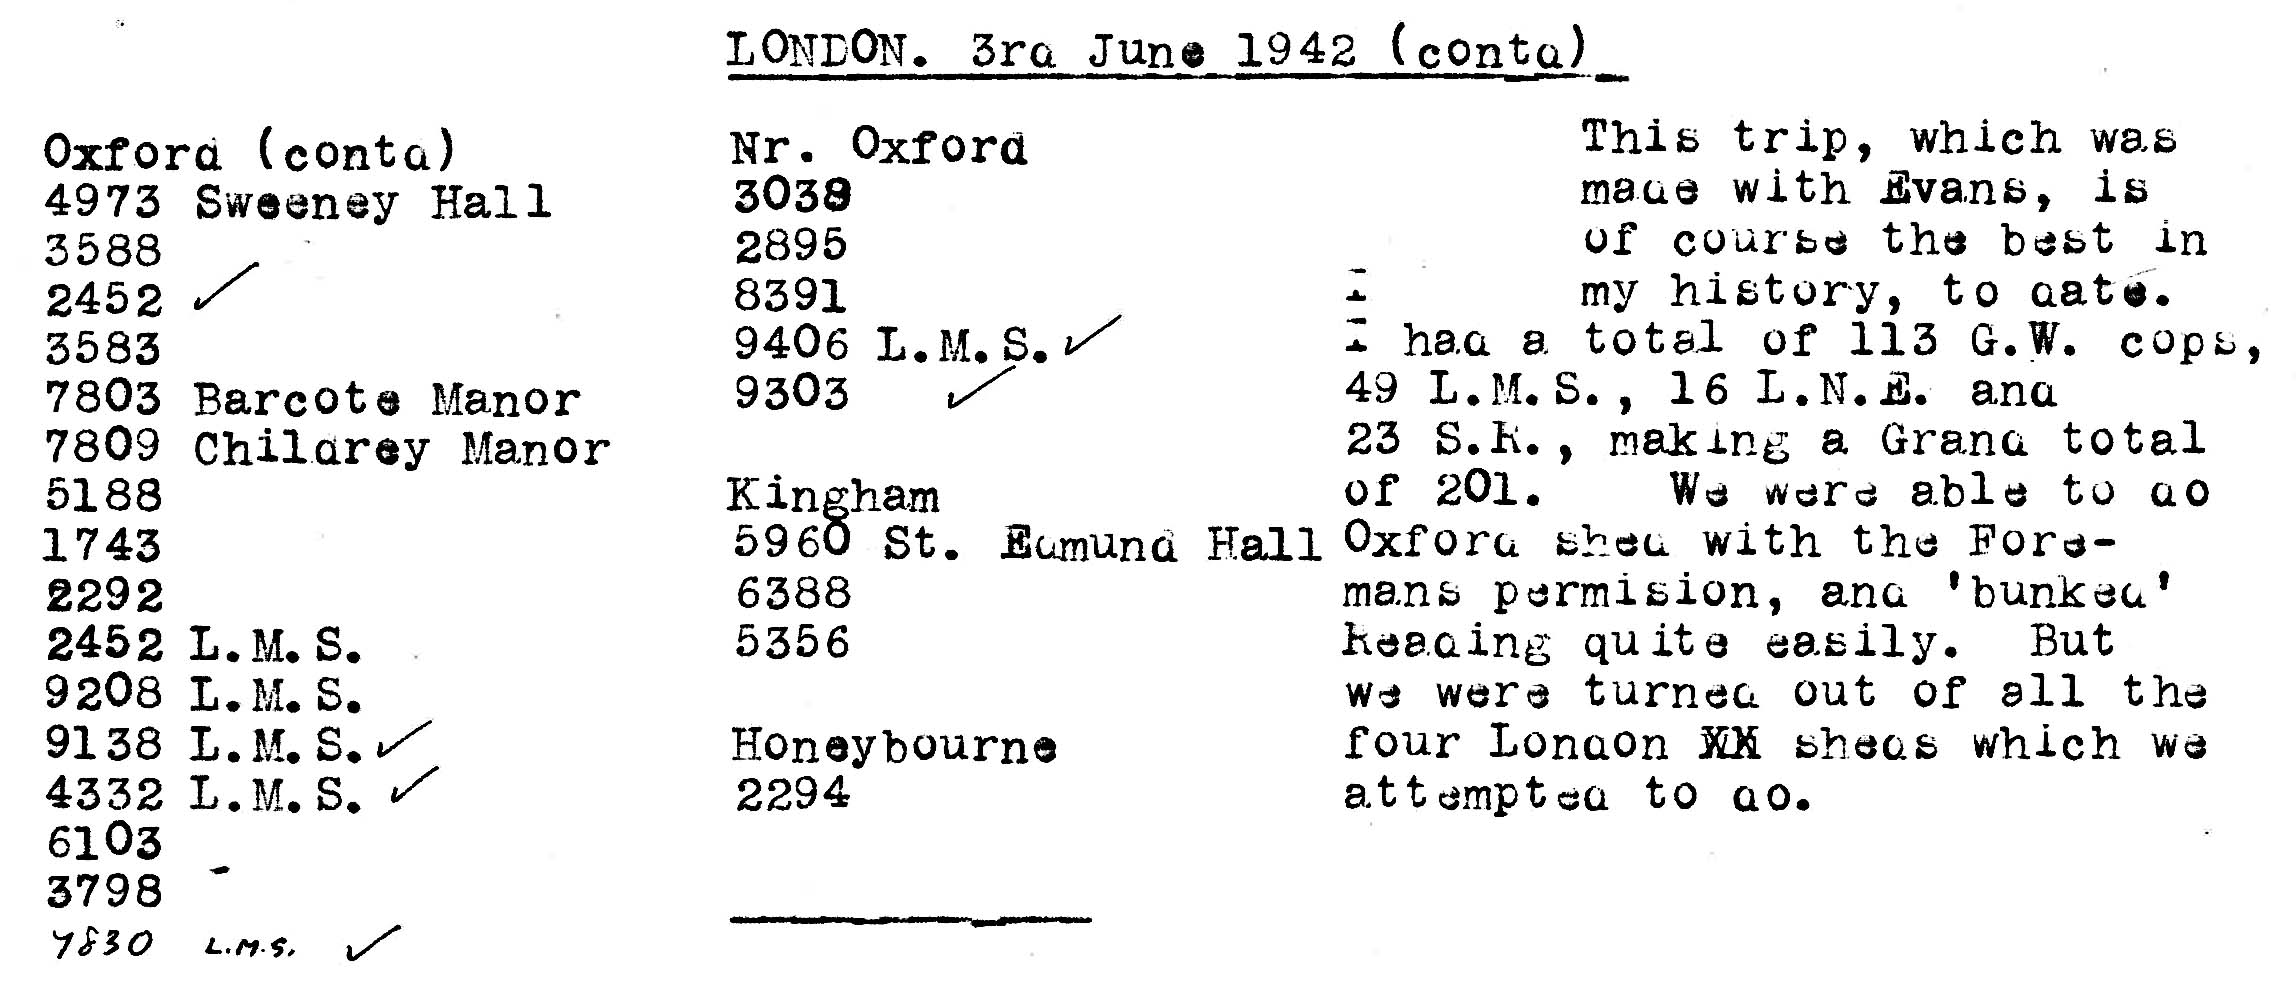 3rd June 1942 - Trip to London.